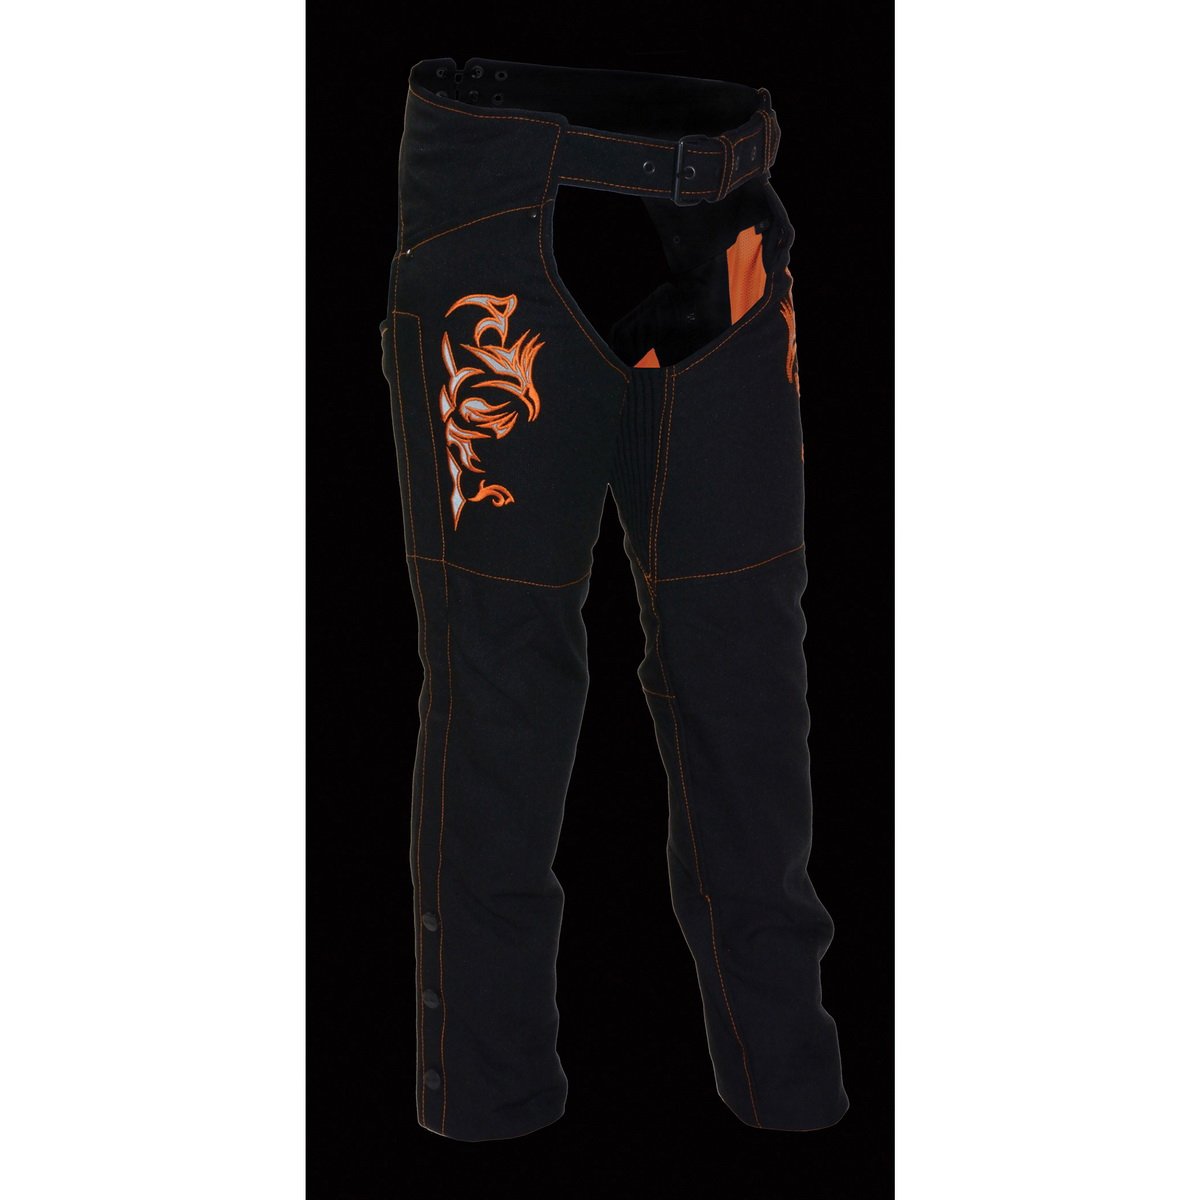 Milwaukee Performance SH1182 Women's Black and Orange Textile Chap with Tribal Embroidery - Milwaukee Performance Womens Textile Chaps